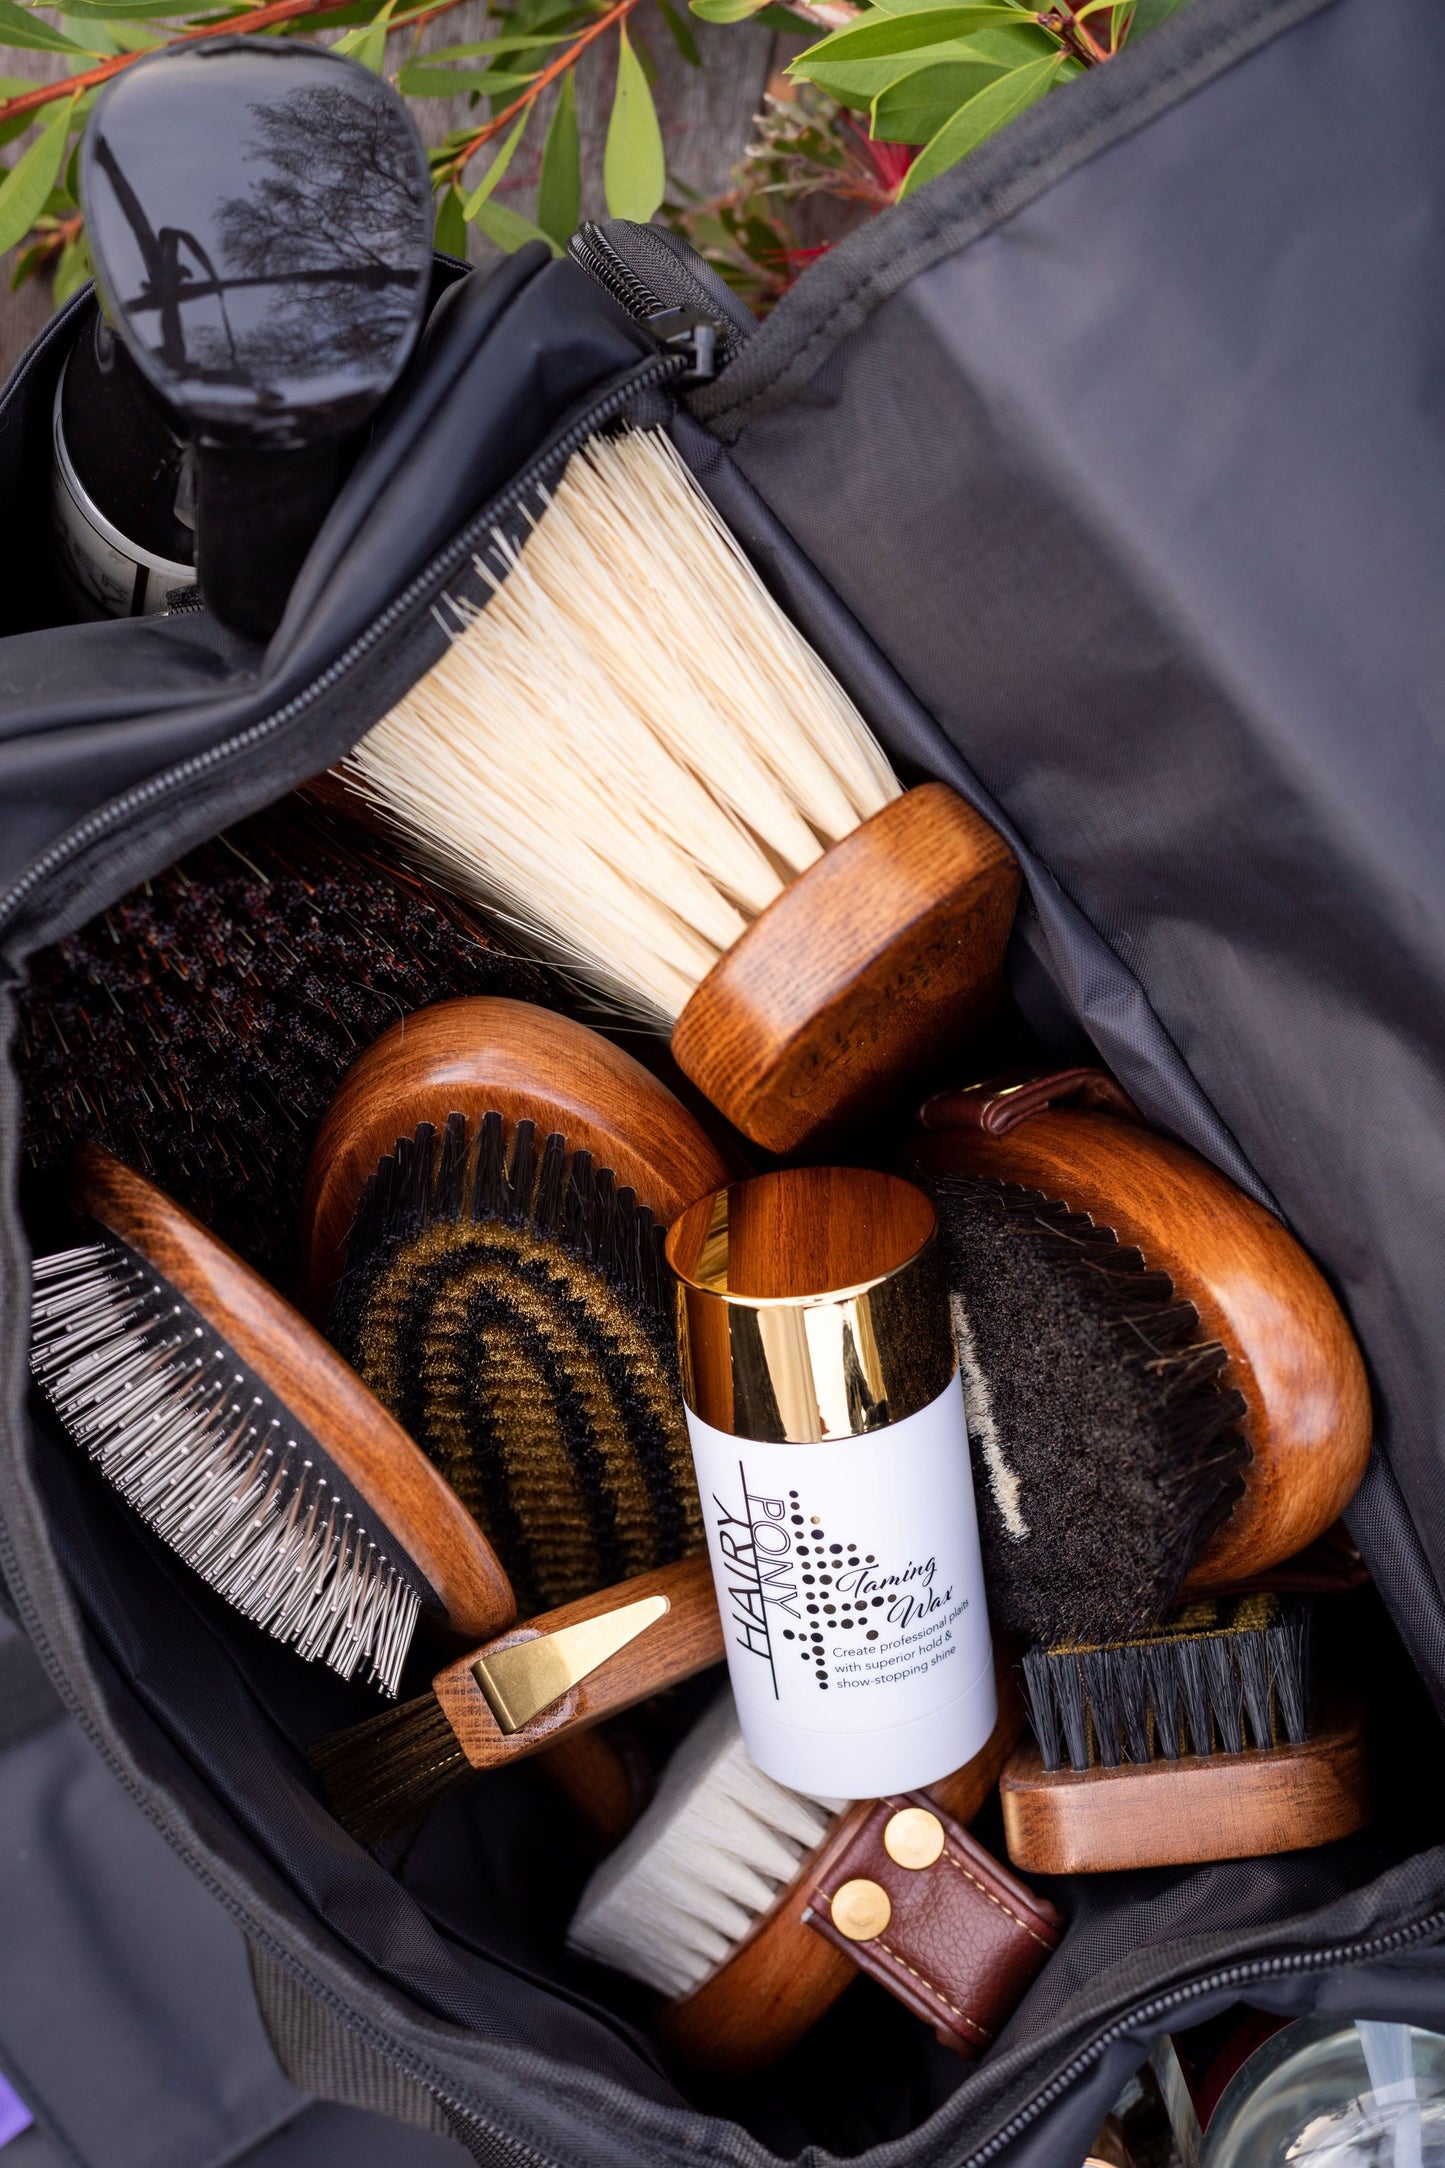 A view of various Hairy Pony grooming products in a Hairy Pony Grooming Bag, including the Hairy Pony Flick Brush.